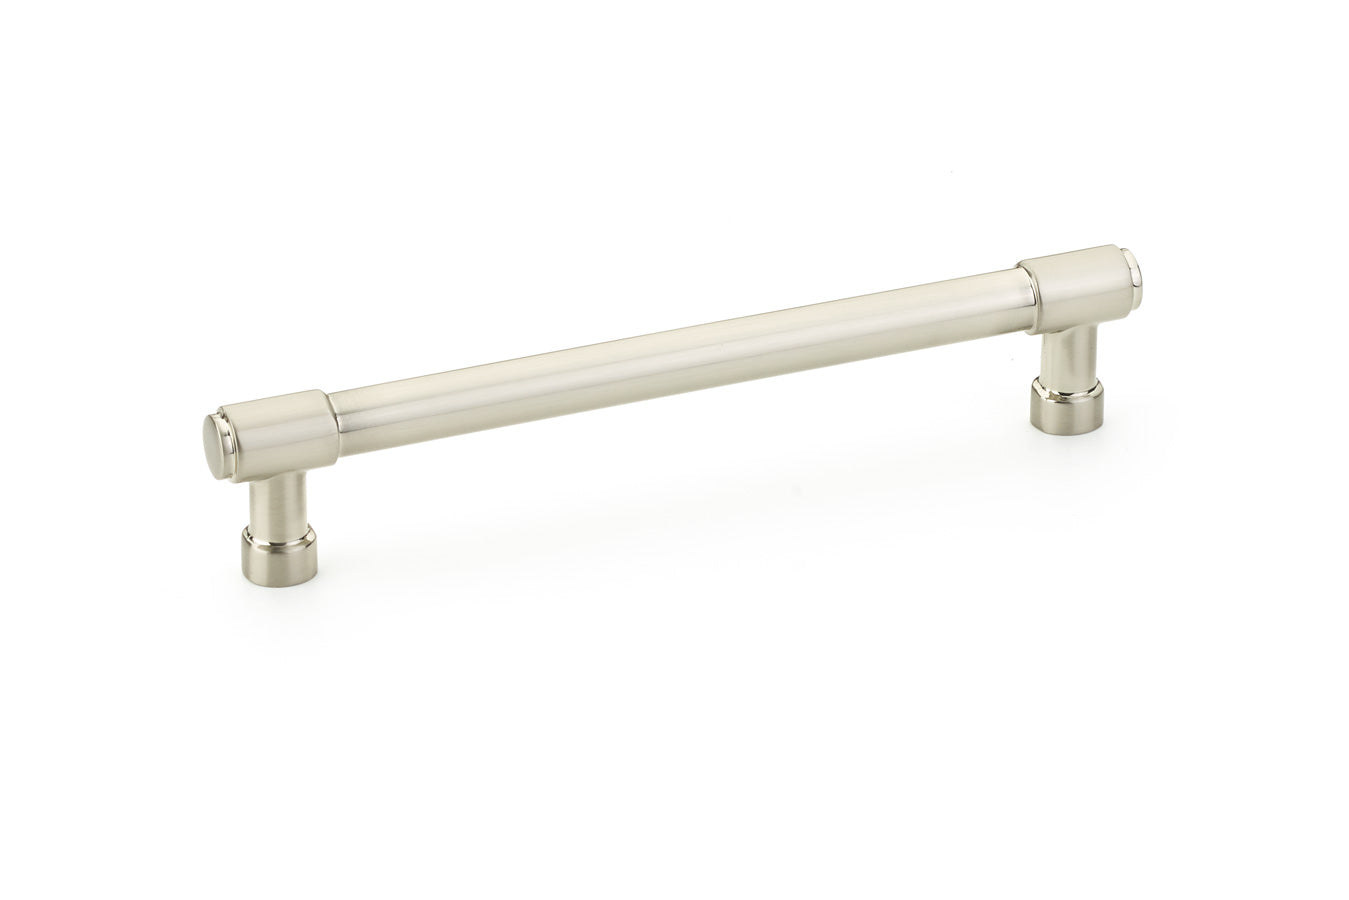 Satin Nickel "Industry" Cabinet Knobs and Drawer Pulls - Industry Hardware